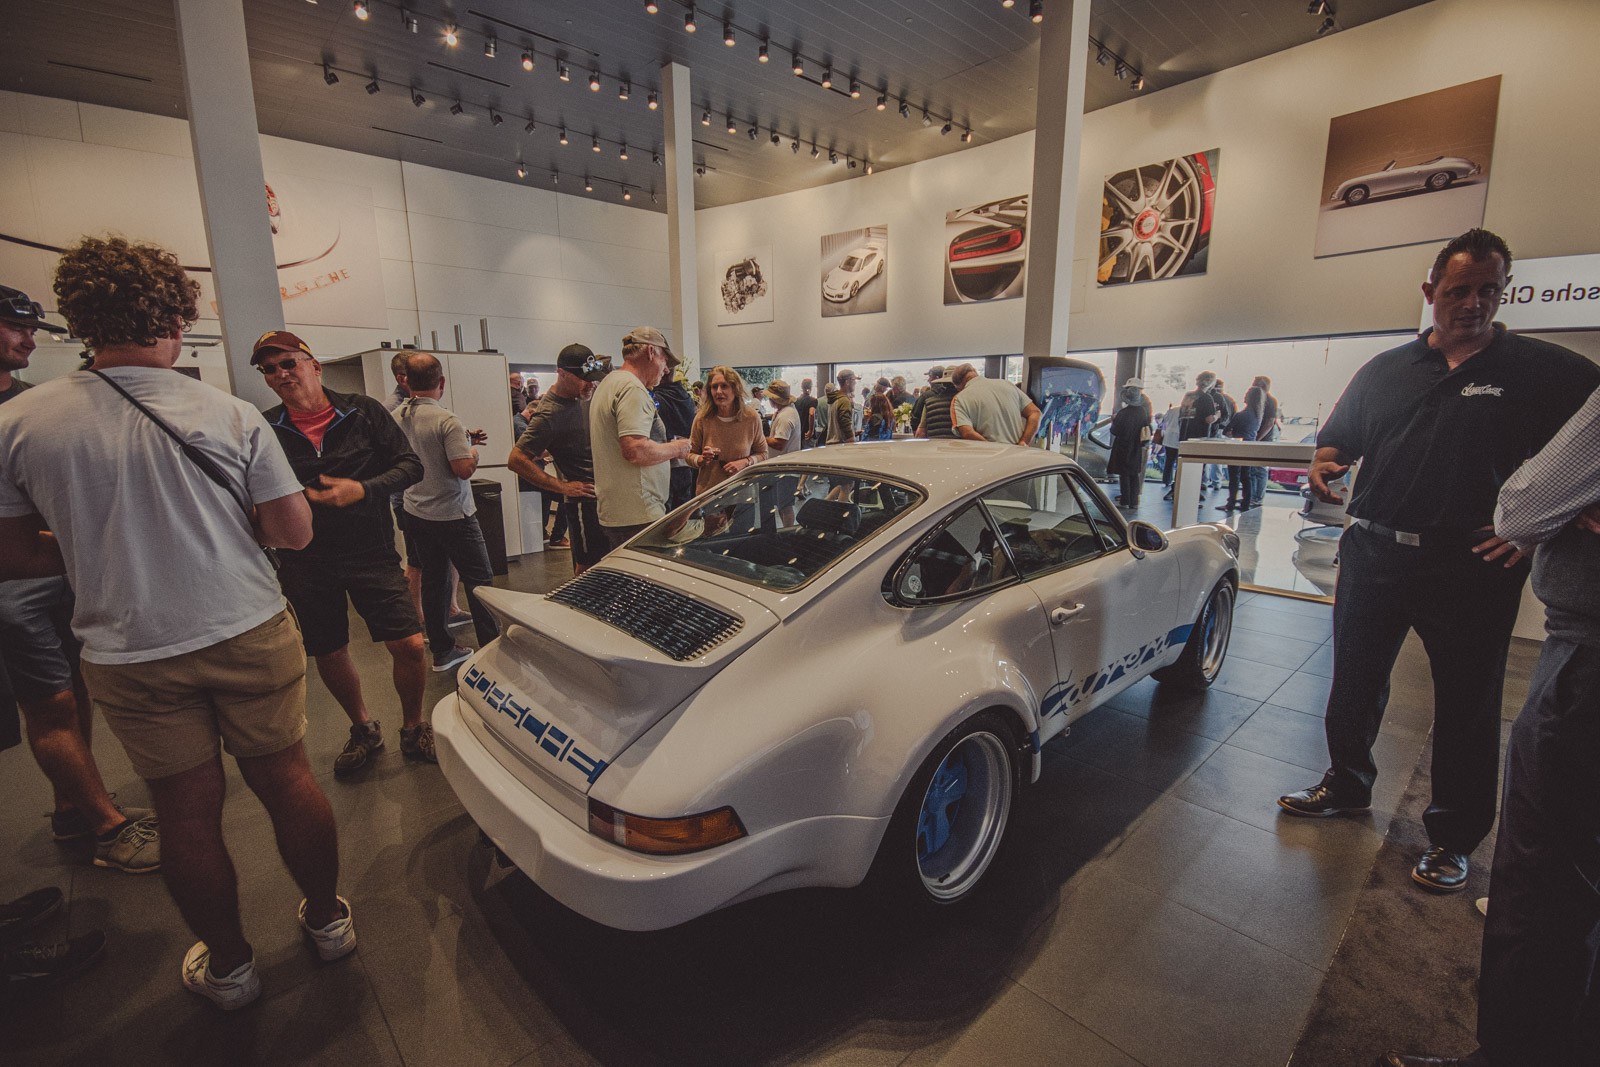 West Coast Customs raffled off their custom version of a 911 Carrera RS recreation on display in the showroom